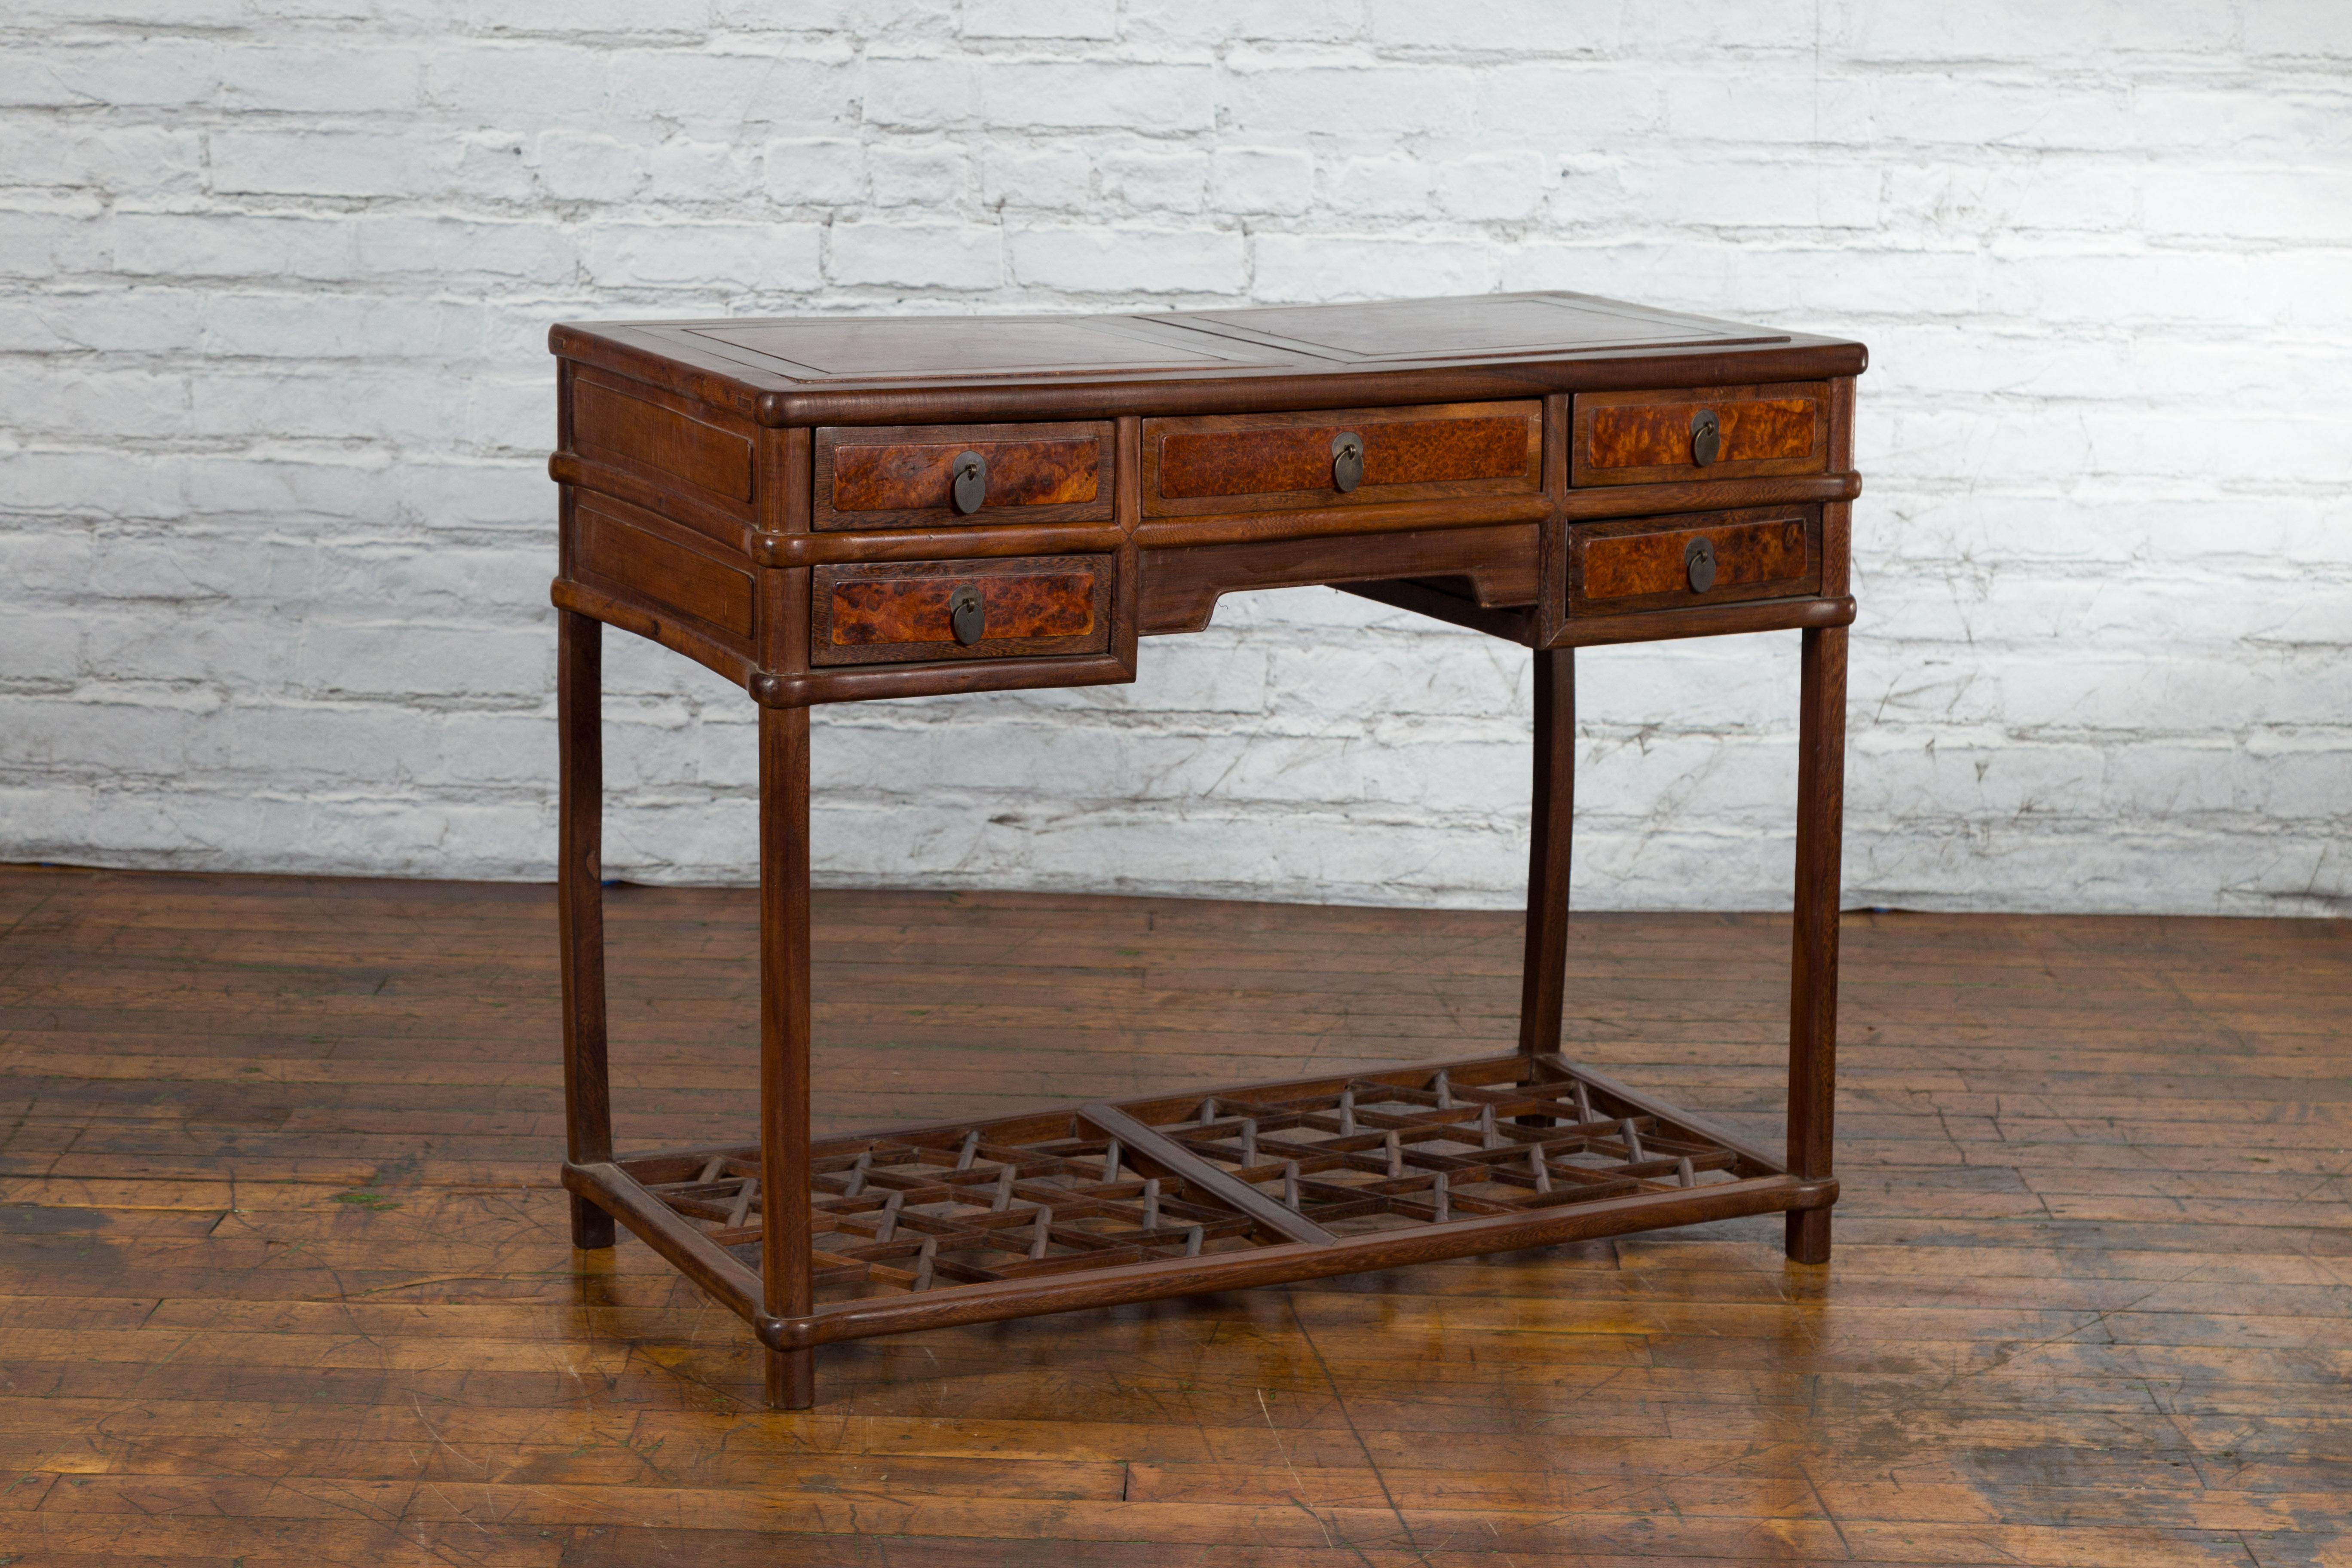 Qing Dynasty 19th Century Desk with Burlwood Top, Drawers and Cracked Ice Shelf For Sale 4